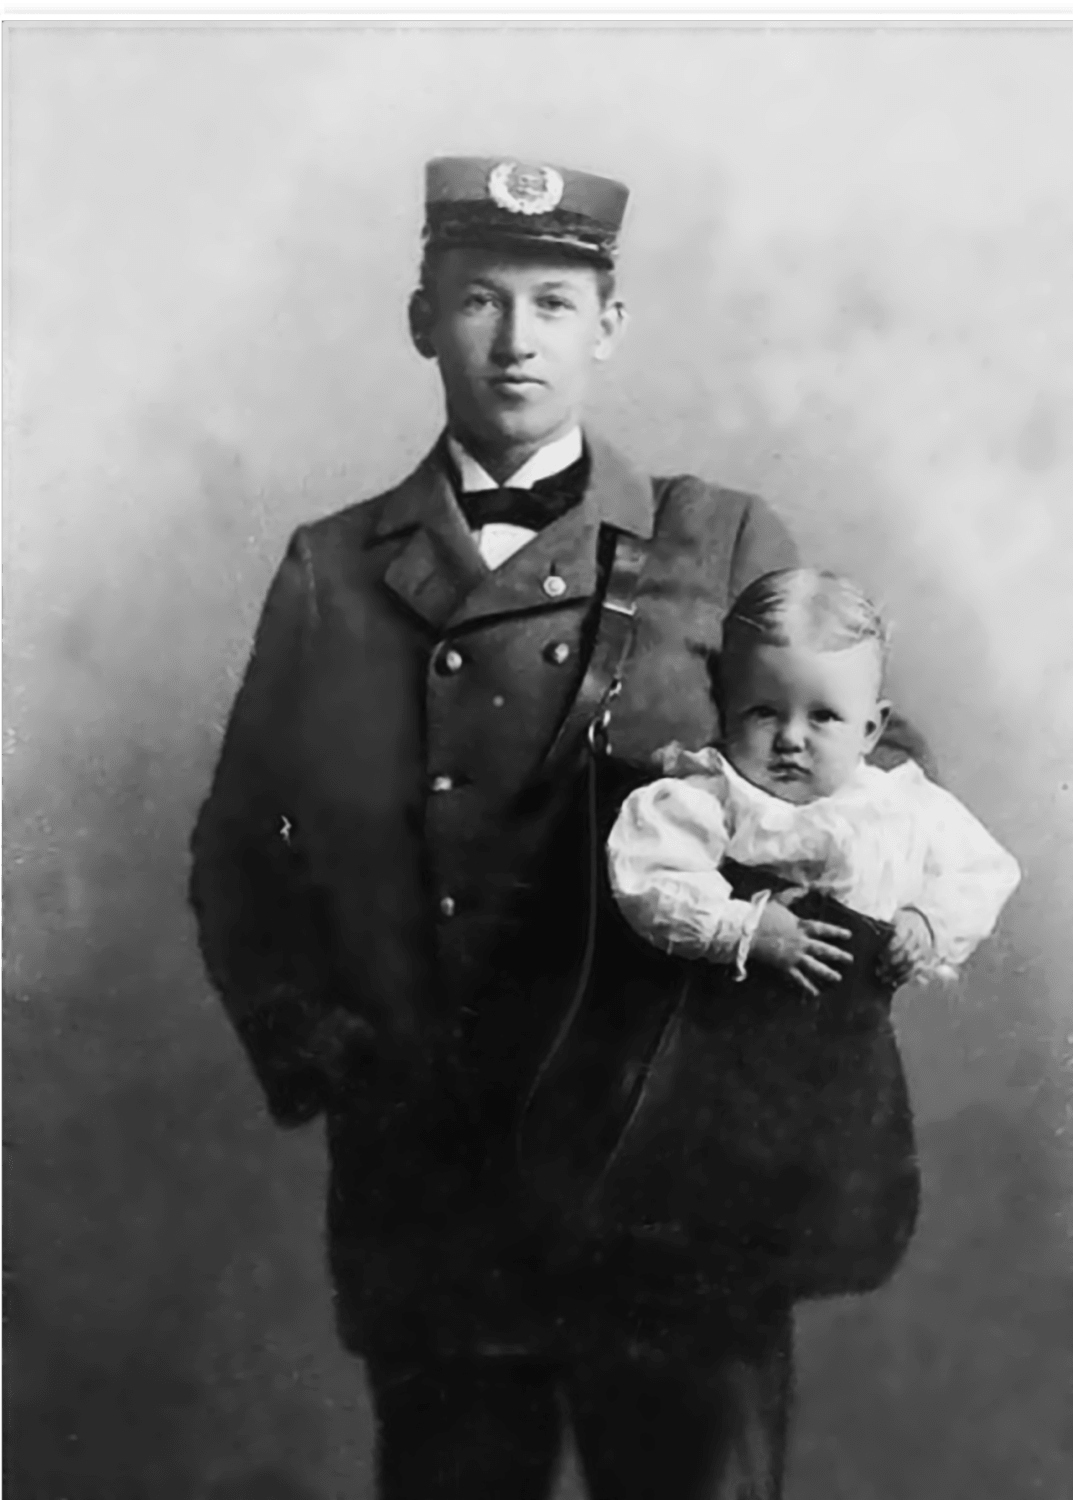 USPS Mailman posing with a baby in his bag. 1913